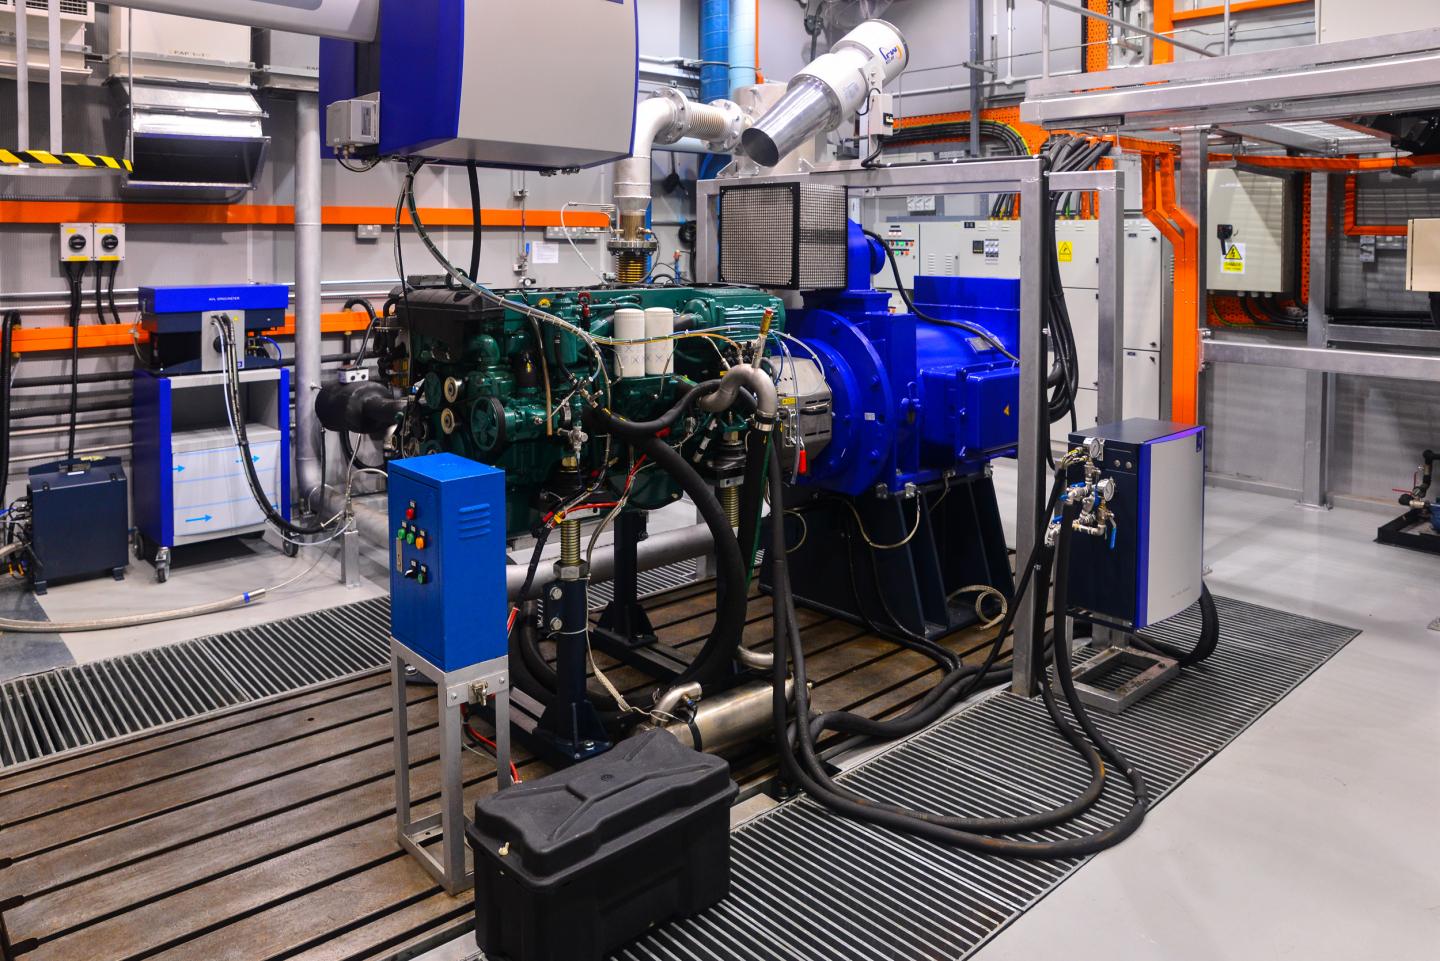 SE Asia's First Dual-Fuel Marine Engine